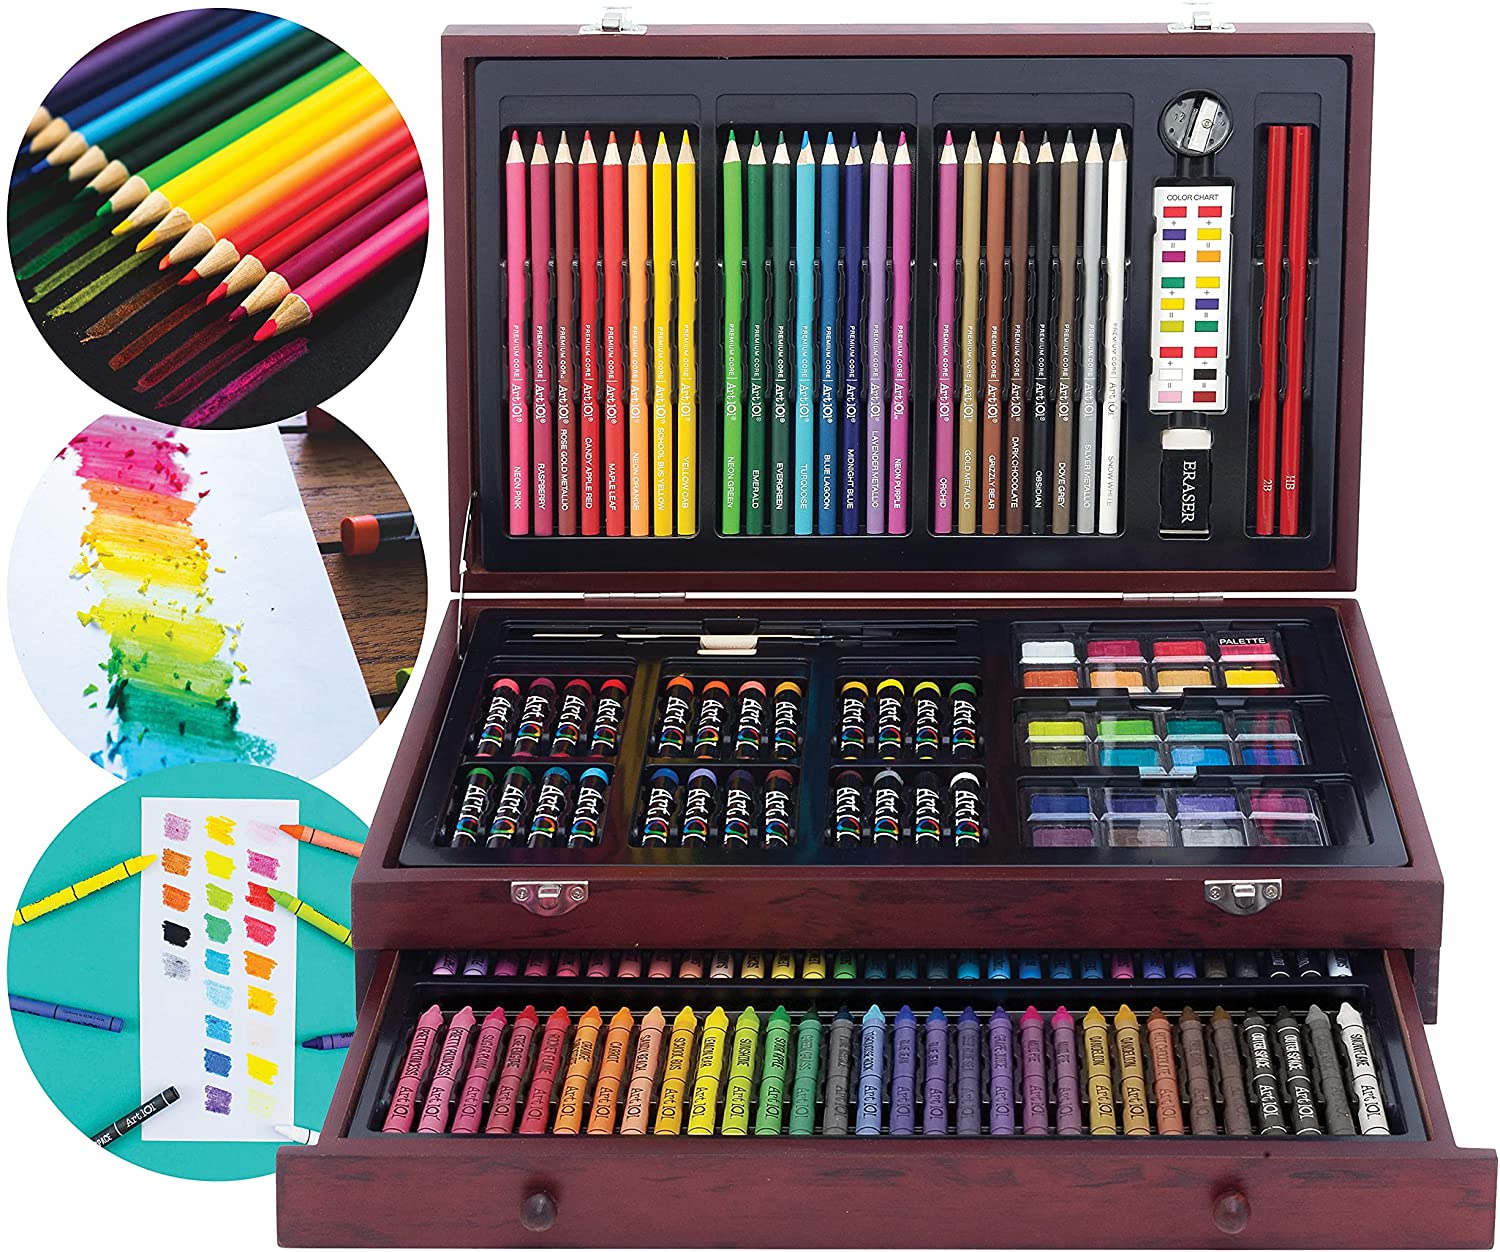 Painting and More in a Plastic Case,Great Gift for Kids 180 Piece Art Set with 50 Page Drawing Pad Art Supplies for Drawing 